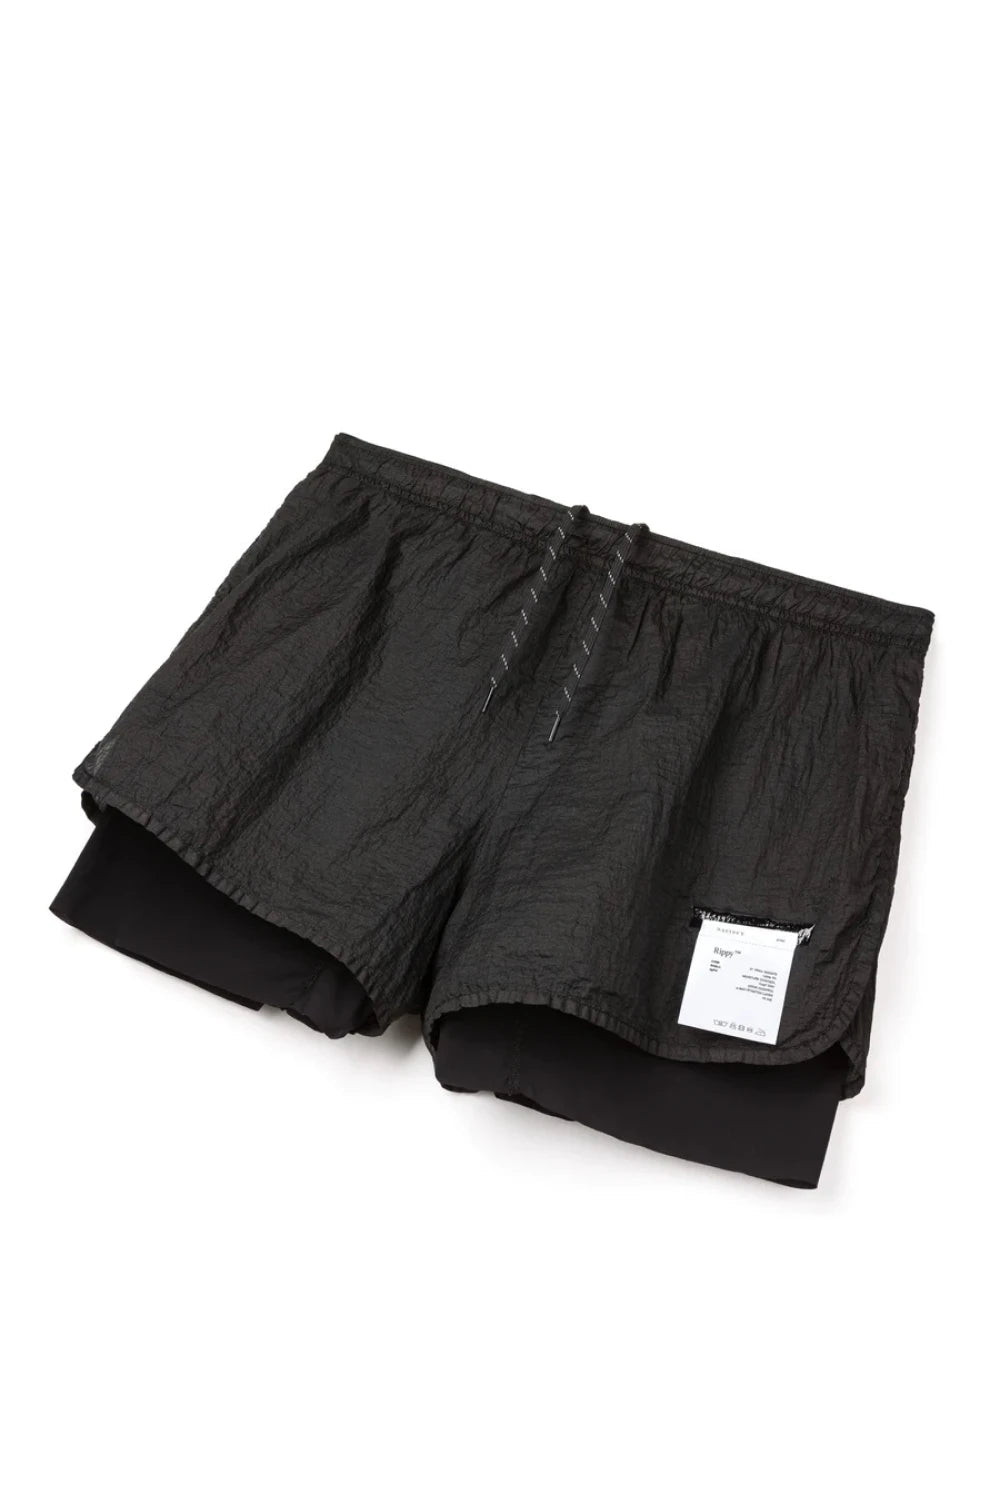 Satisfy Rippy™ 3" Trail Shorts - Black | Coffee Outdoors